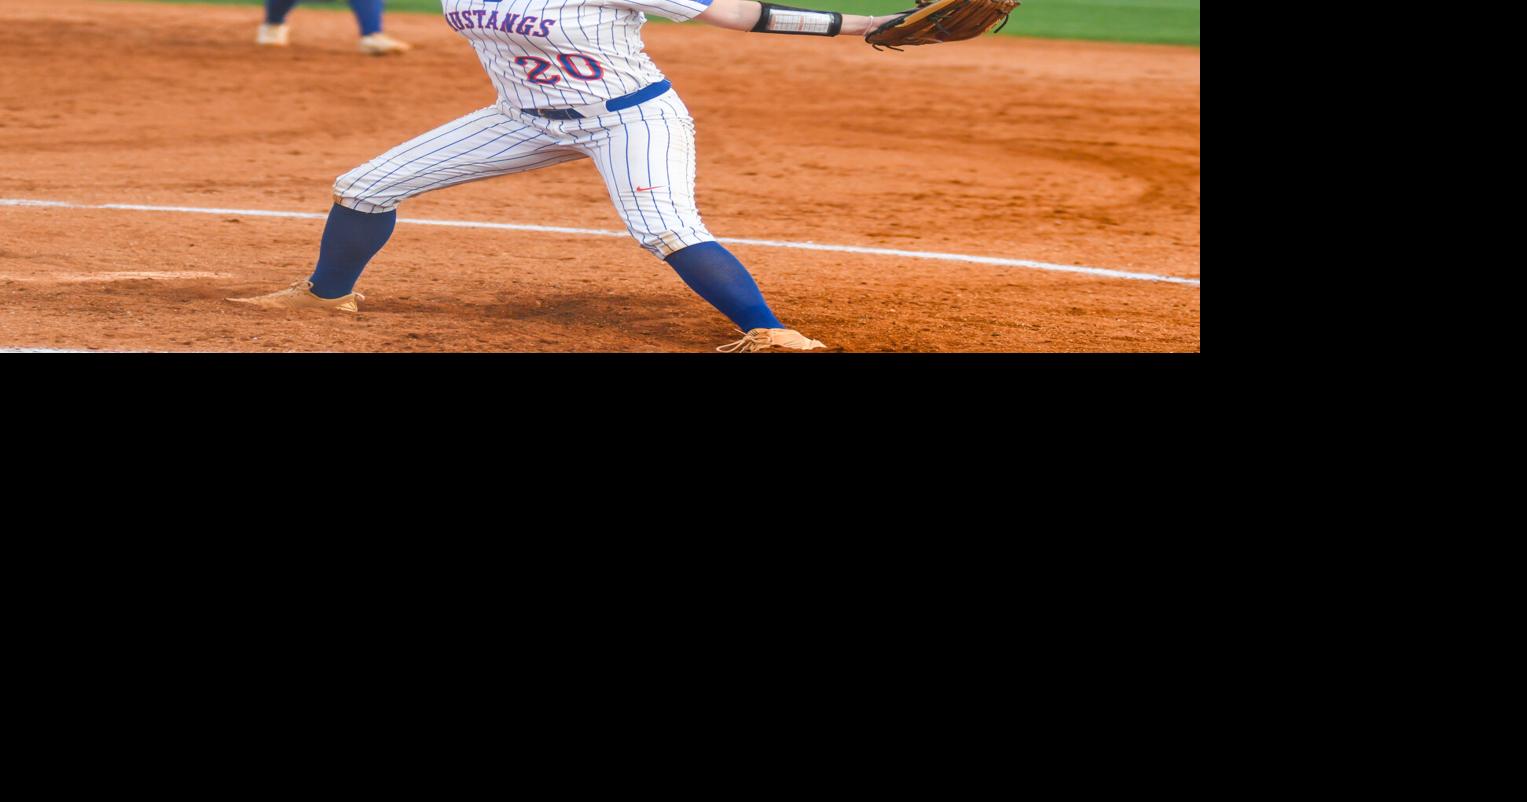 Local Sports: Midland Valley Softball Triumphs over Easley in Playoffs